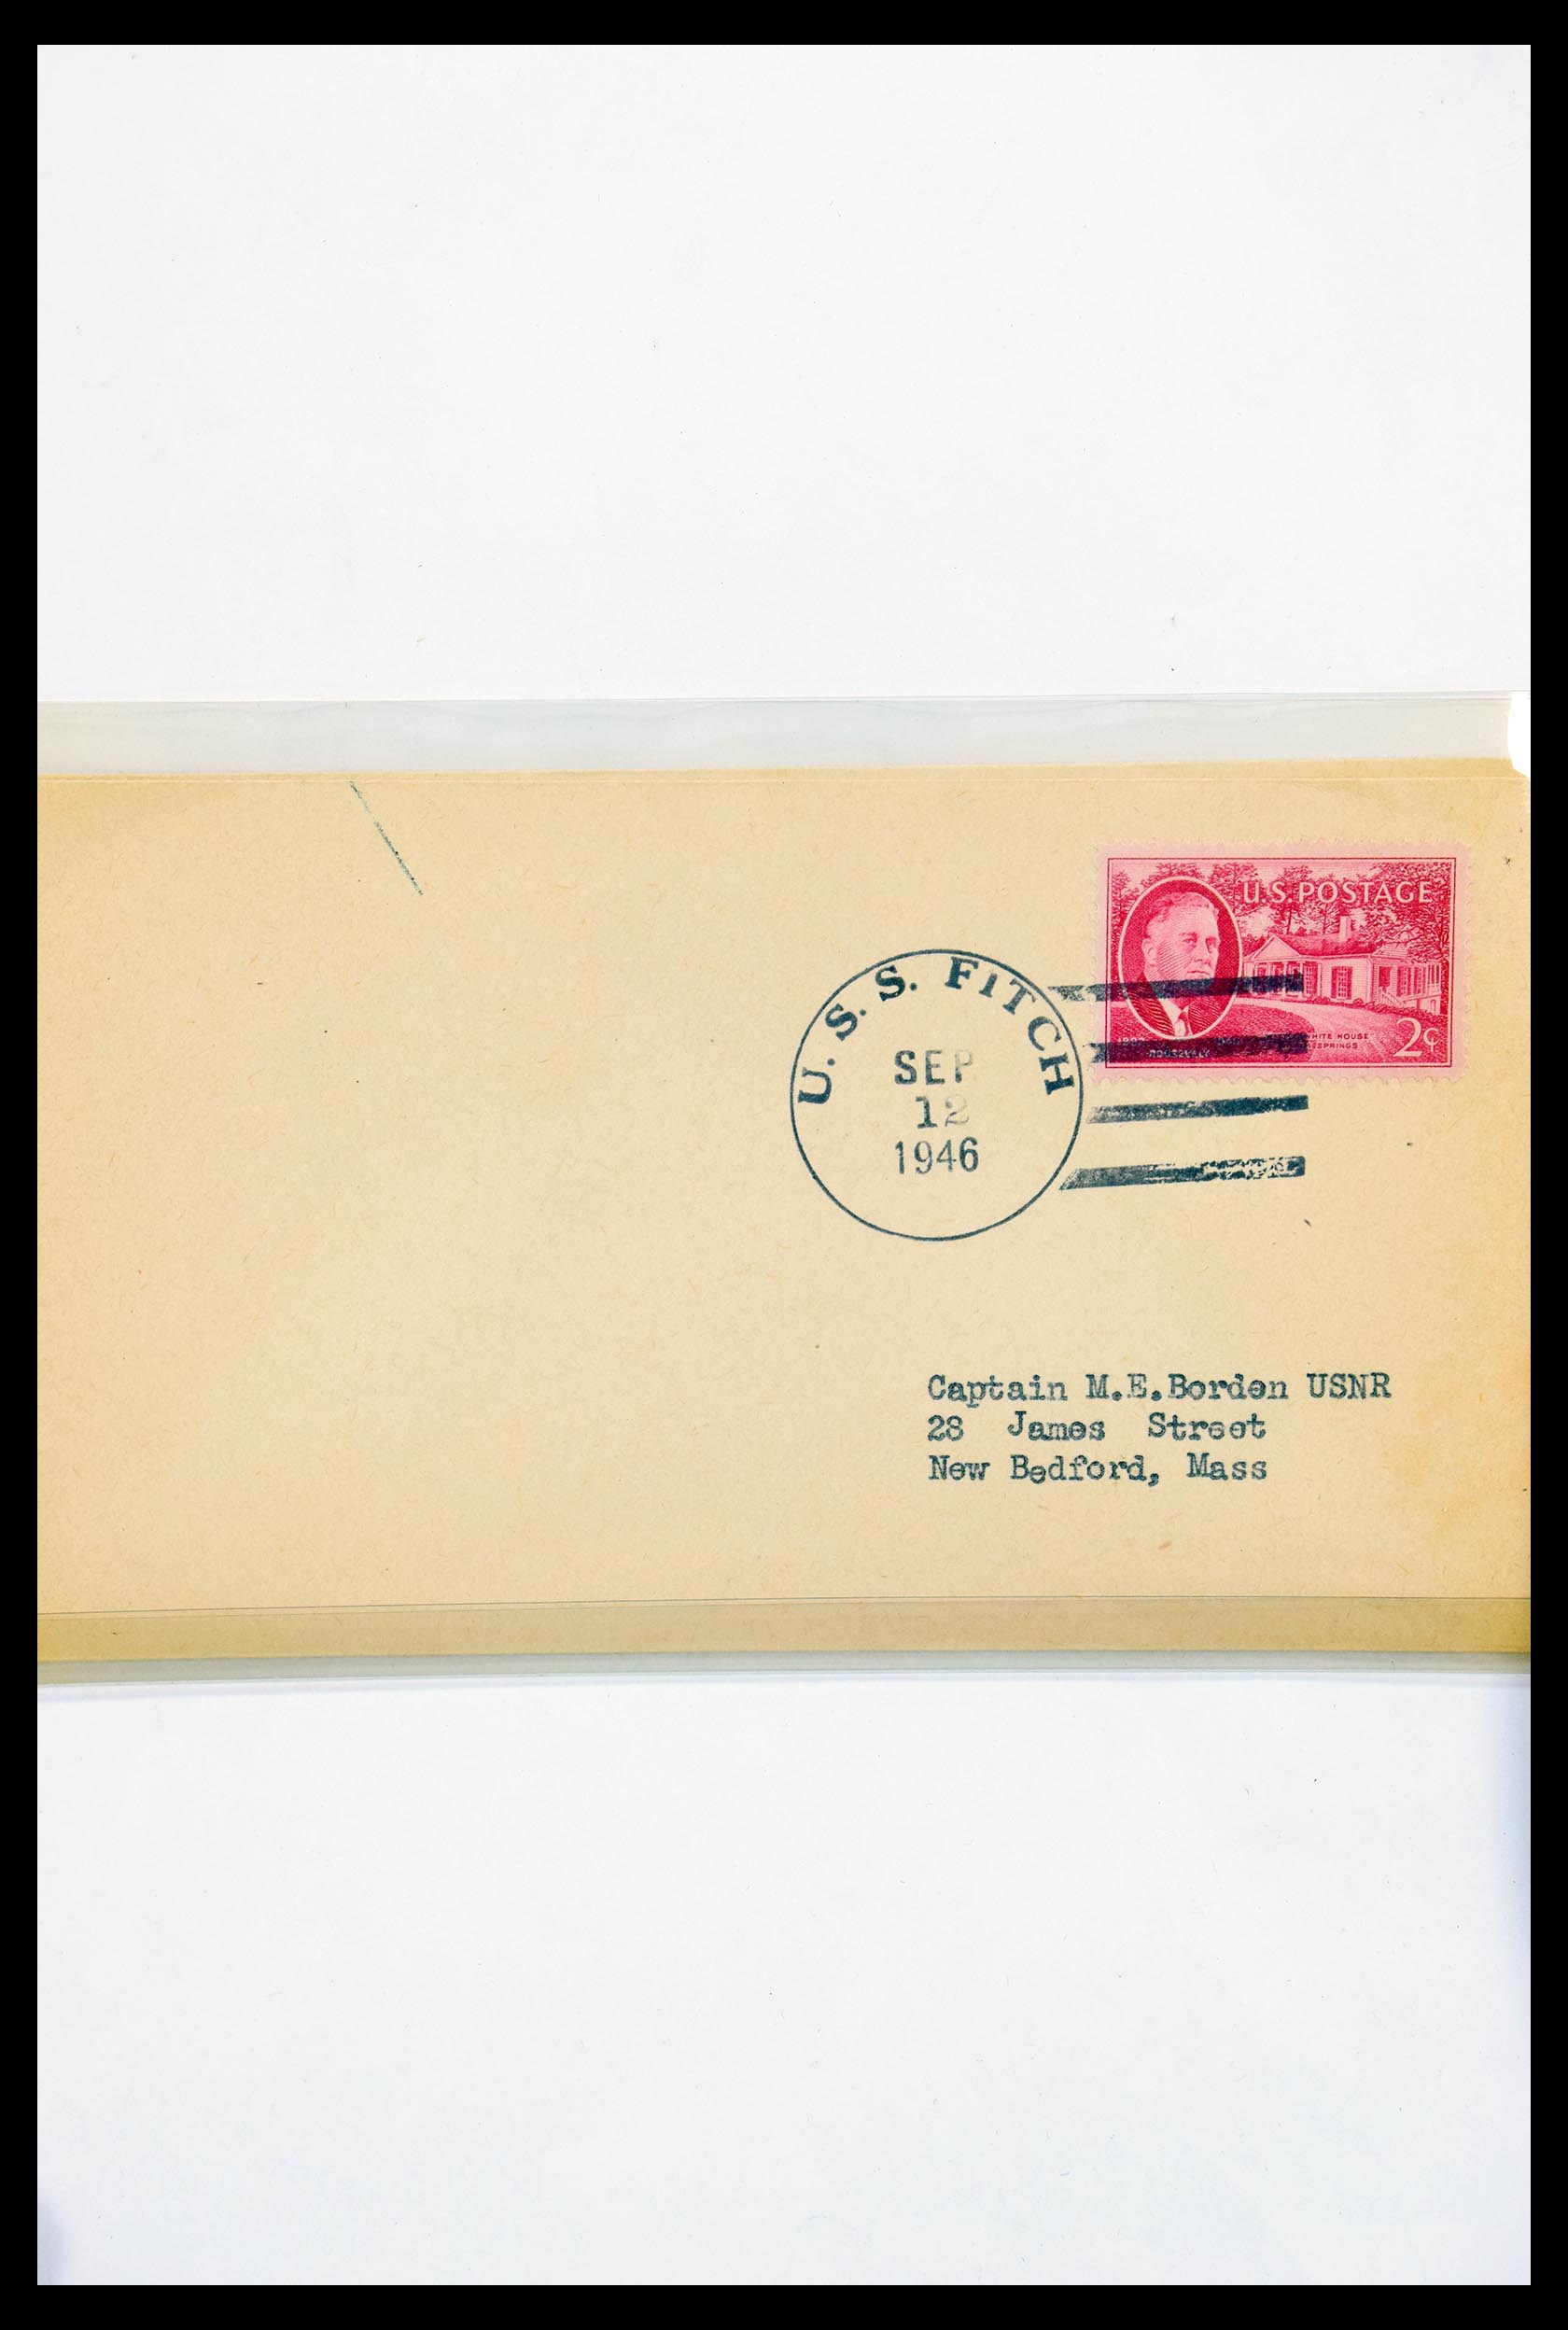 30341 315 - 30341 USA naval cover collection 1930-1970.